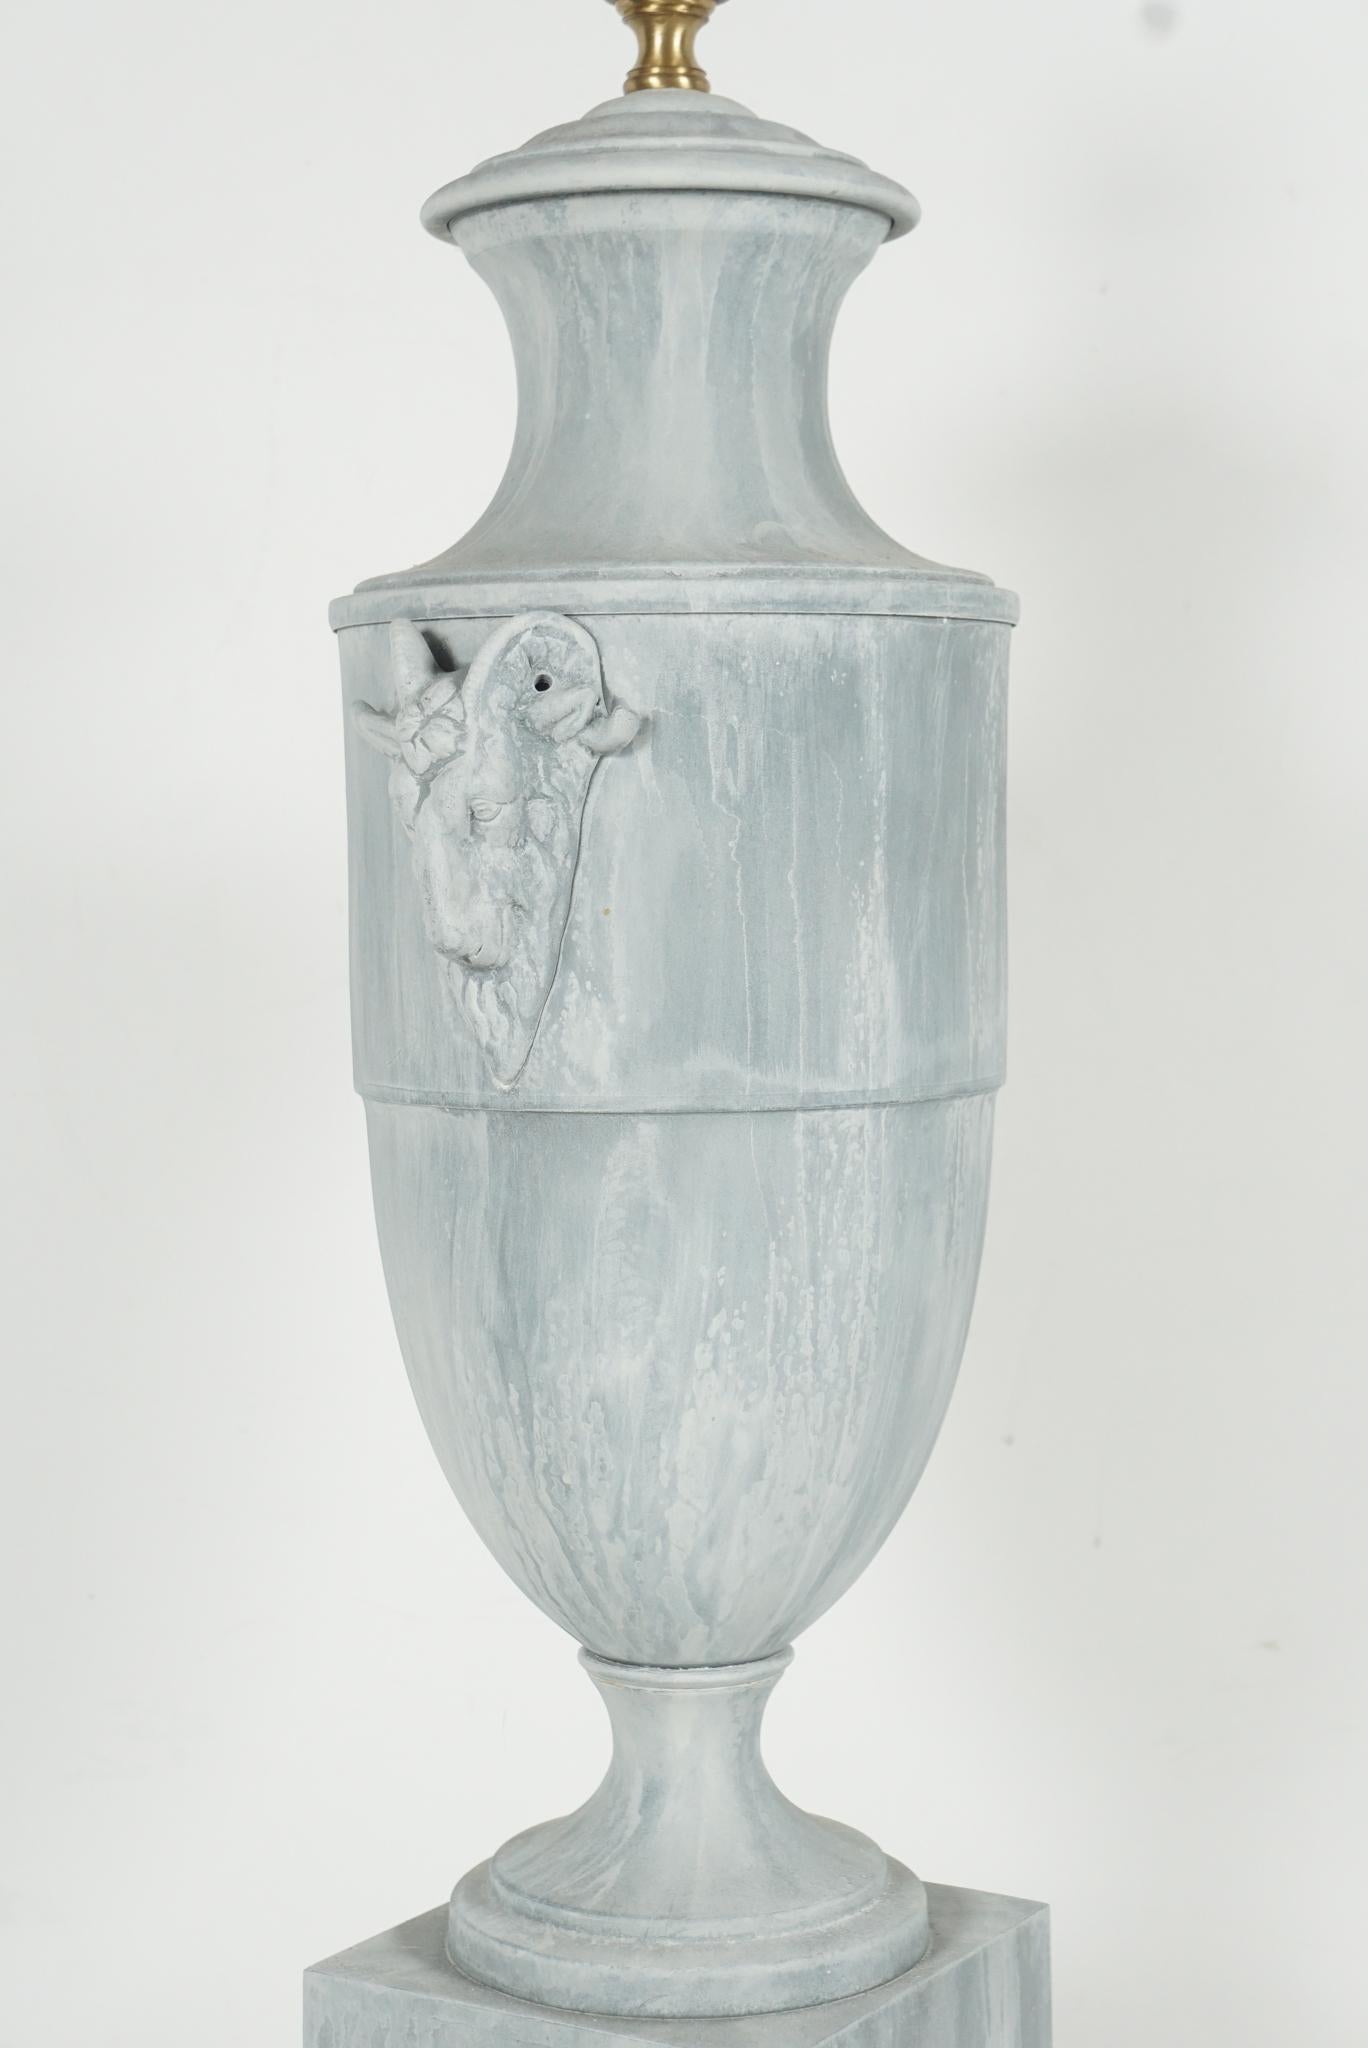 Early 20th Century French Zinc Urn Lamp from the Estate of Bunny Mellon For Sale 2